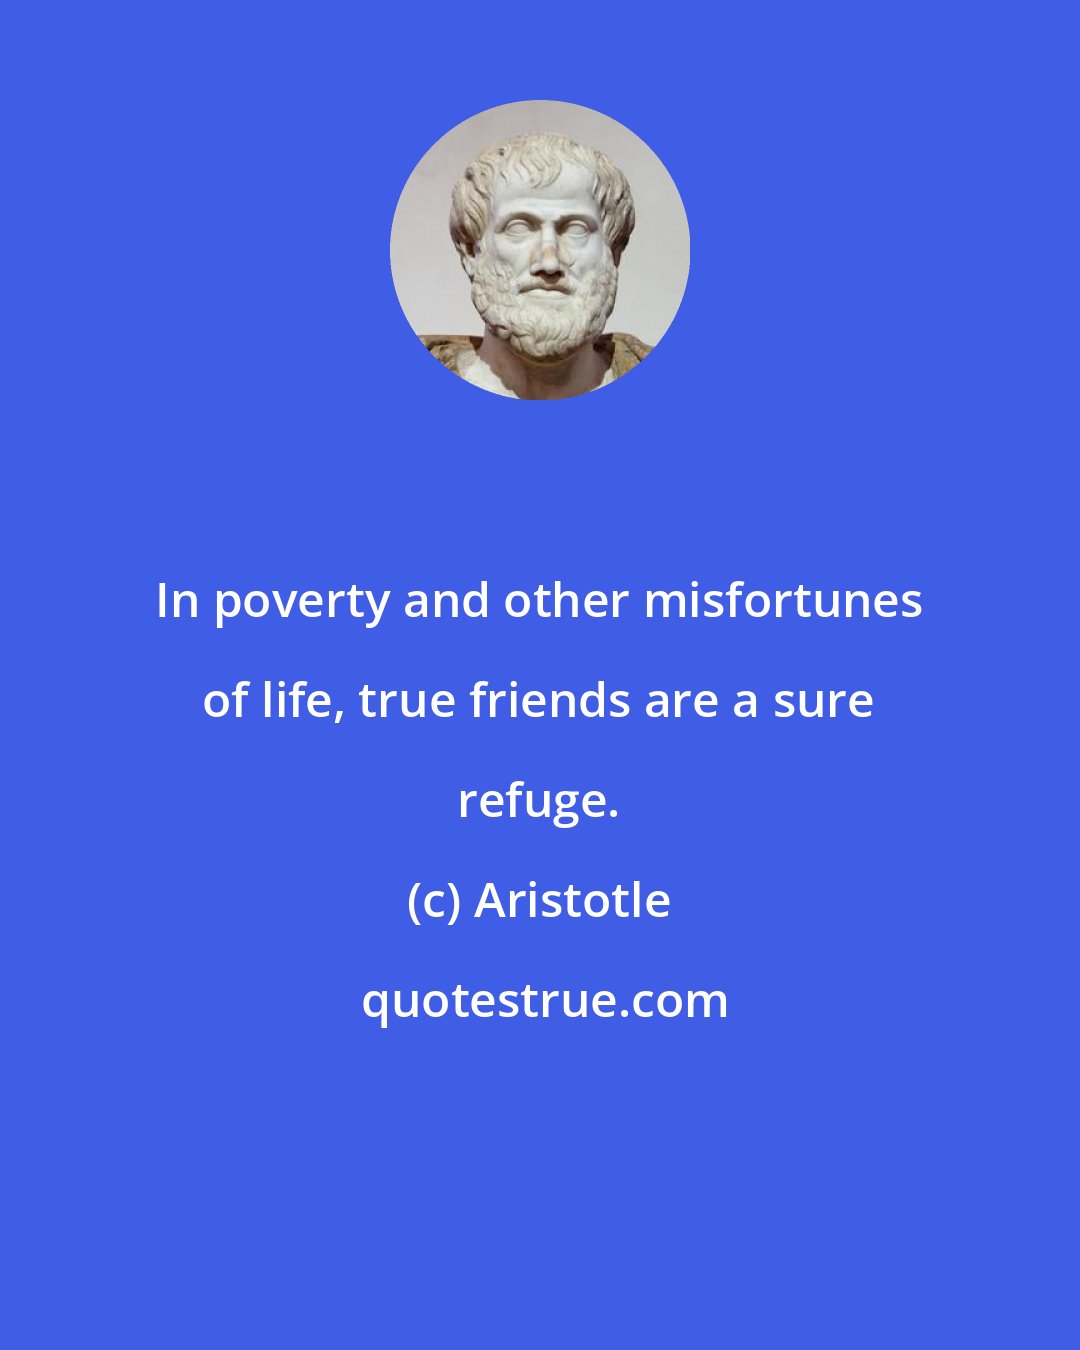 Aristotle: In poverty and other misfortunes of life, true friends are a sure refuge.